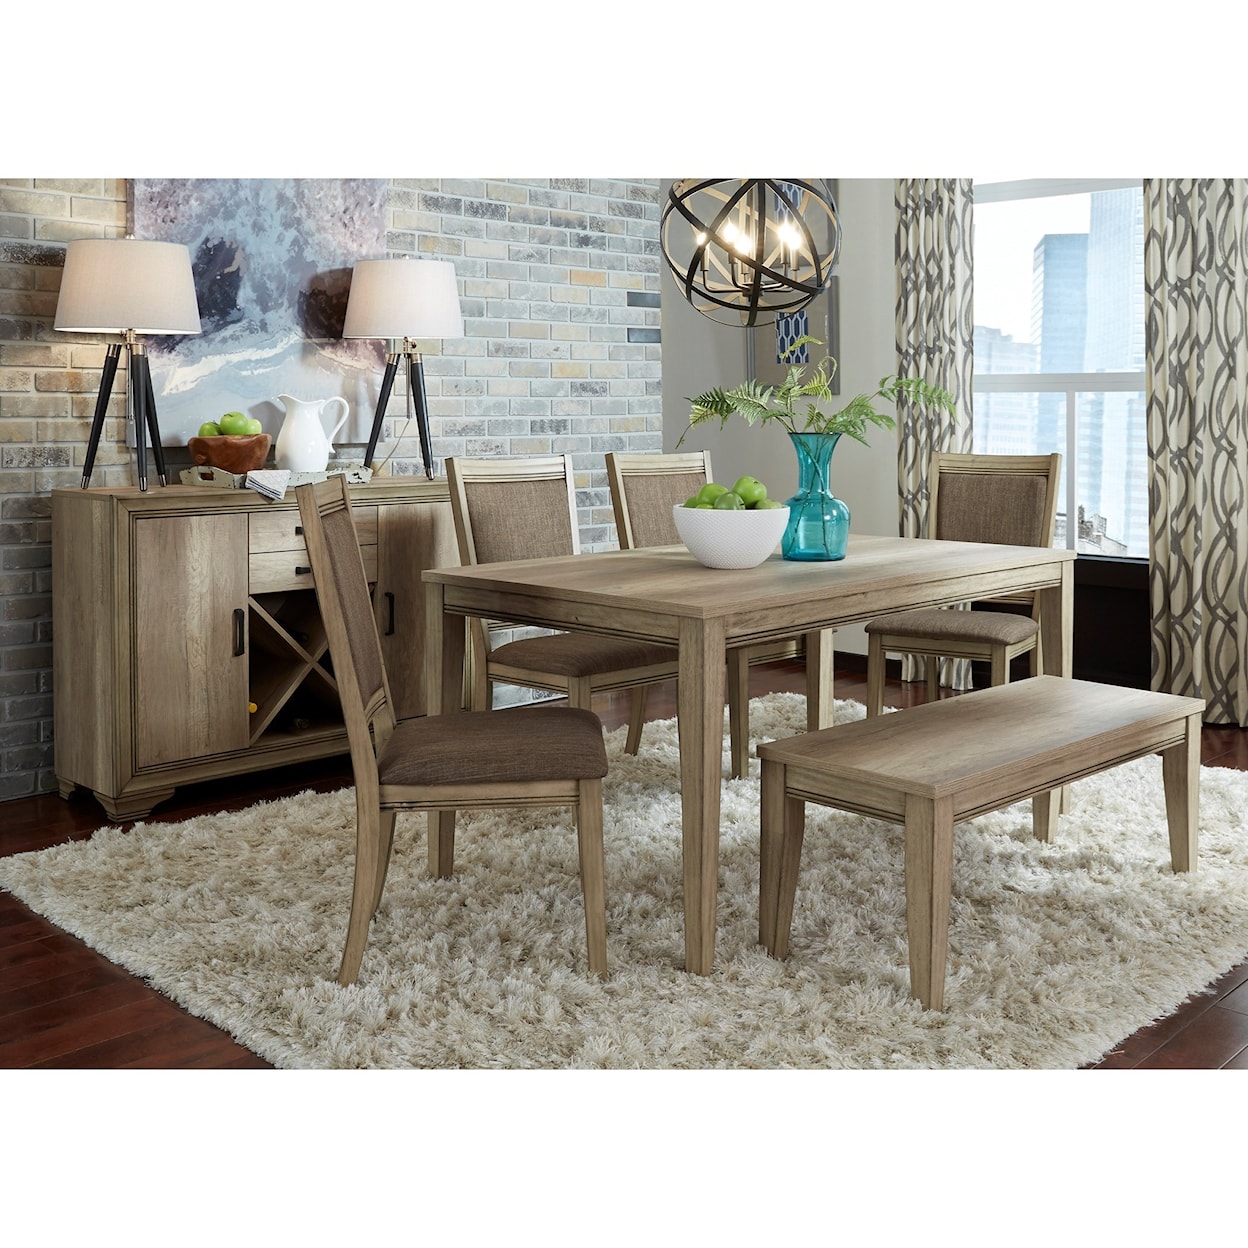 Libby Sun Valley 7-Piece Dining Room Group